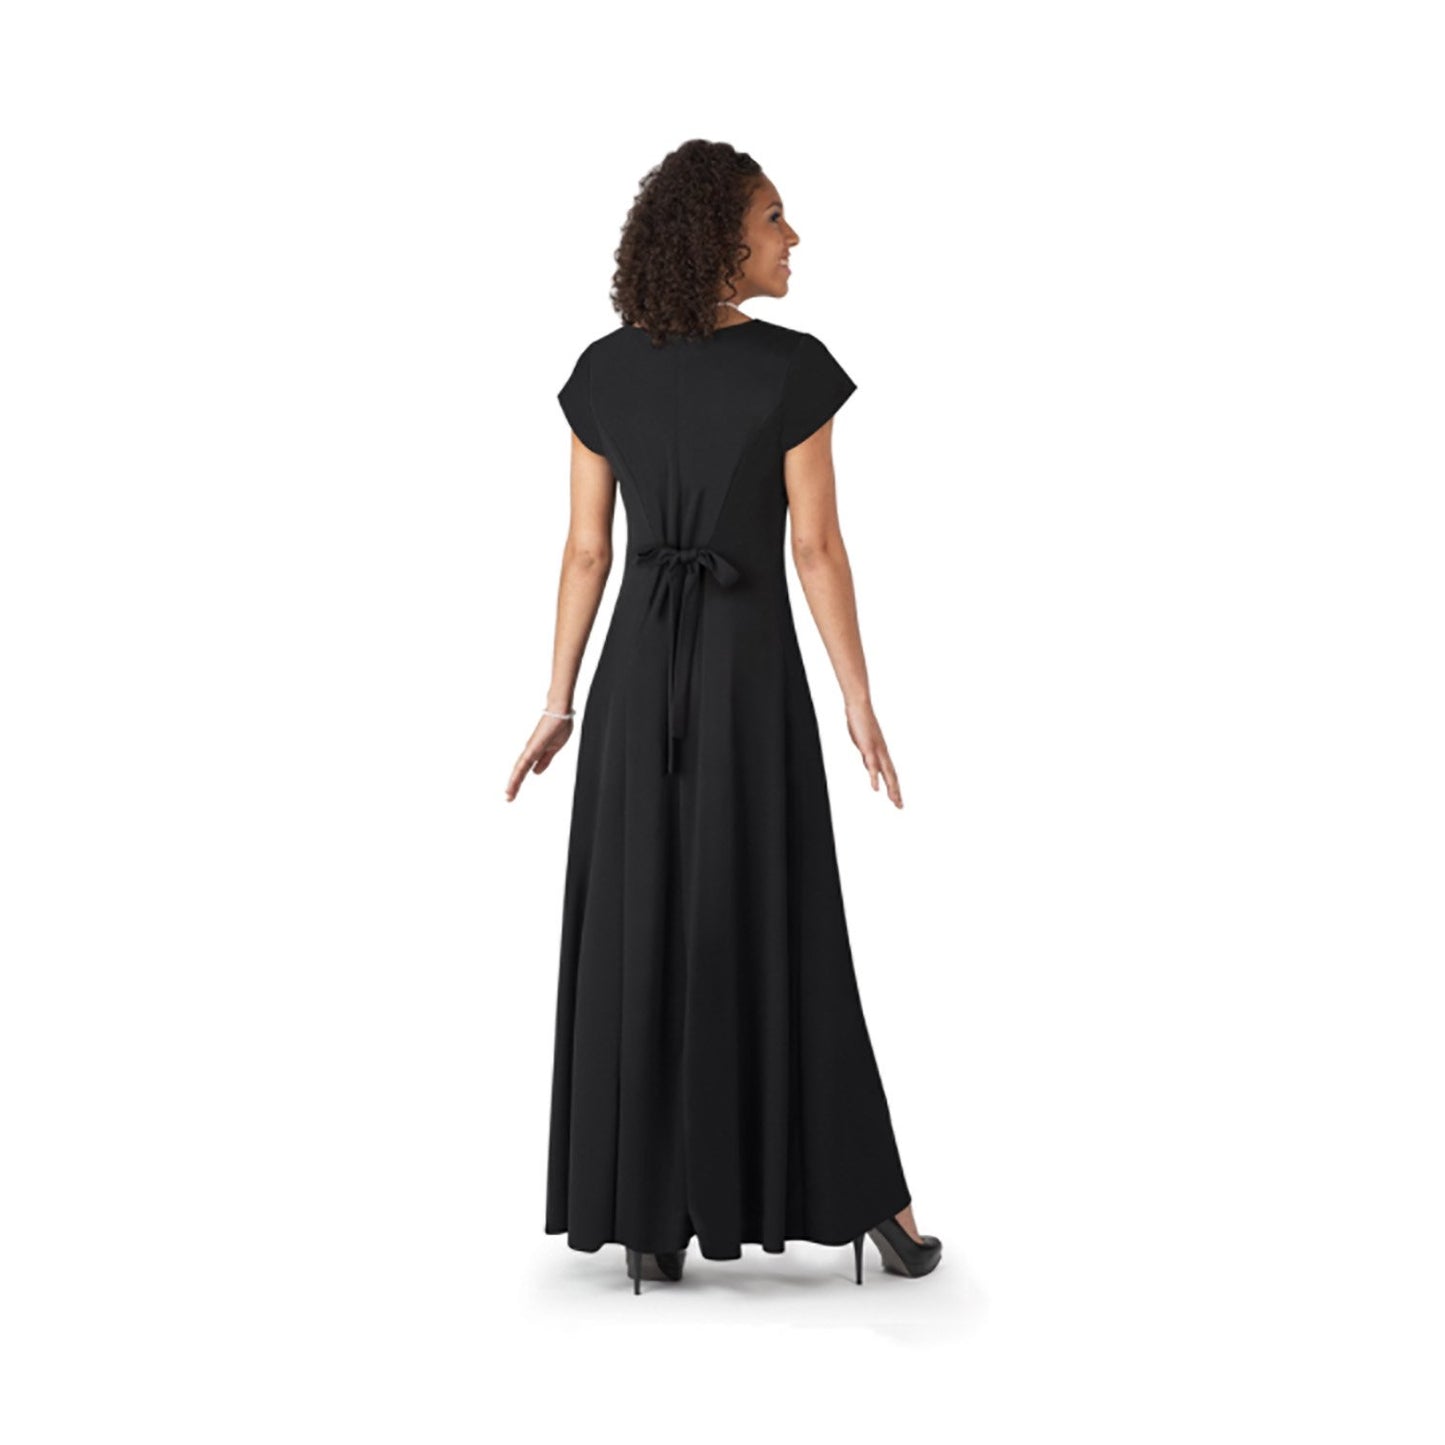 Pippa Cowl Neck Dress (Adult & Youth)